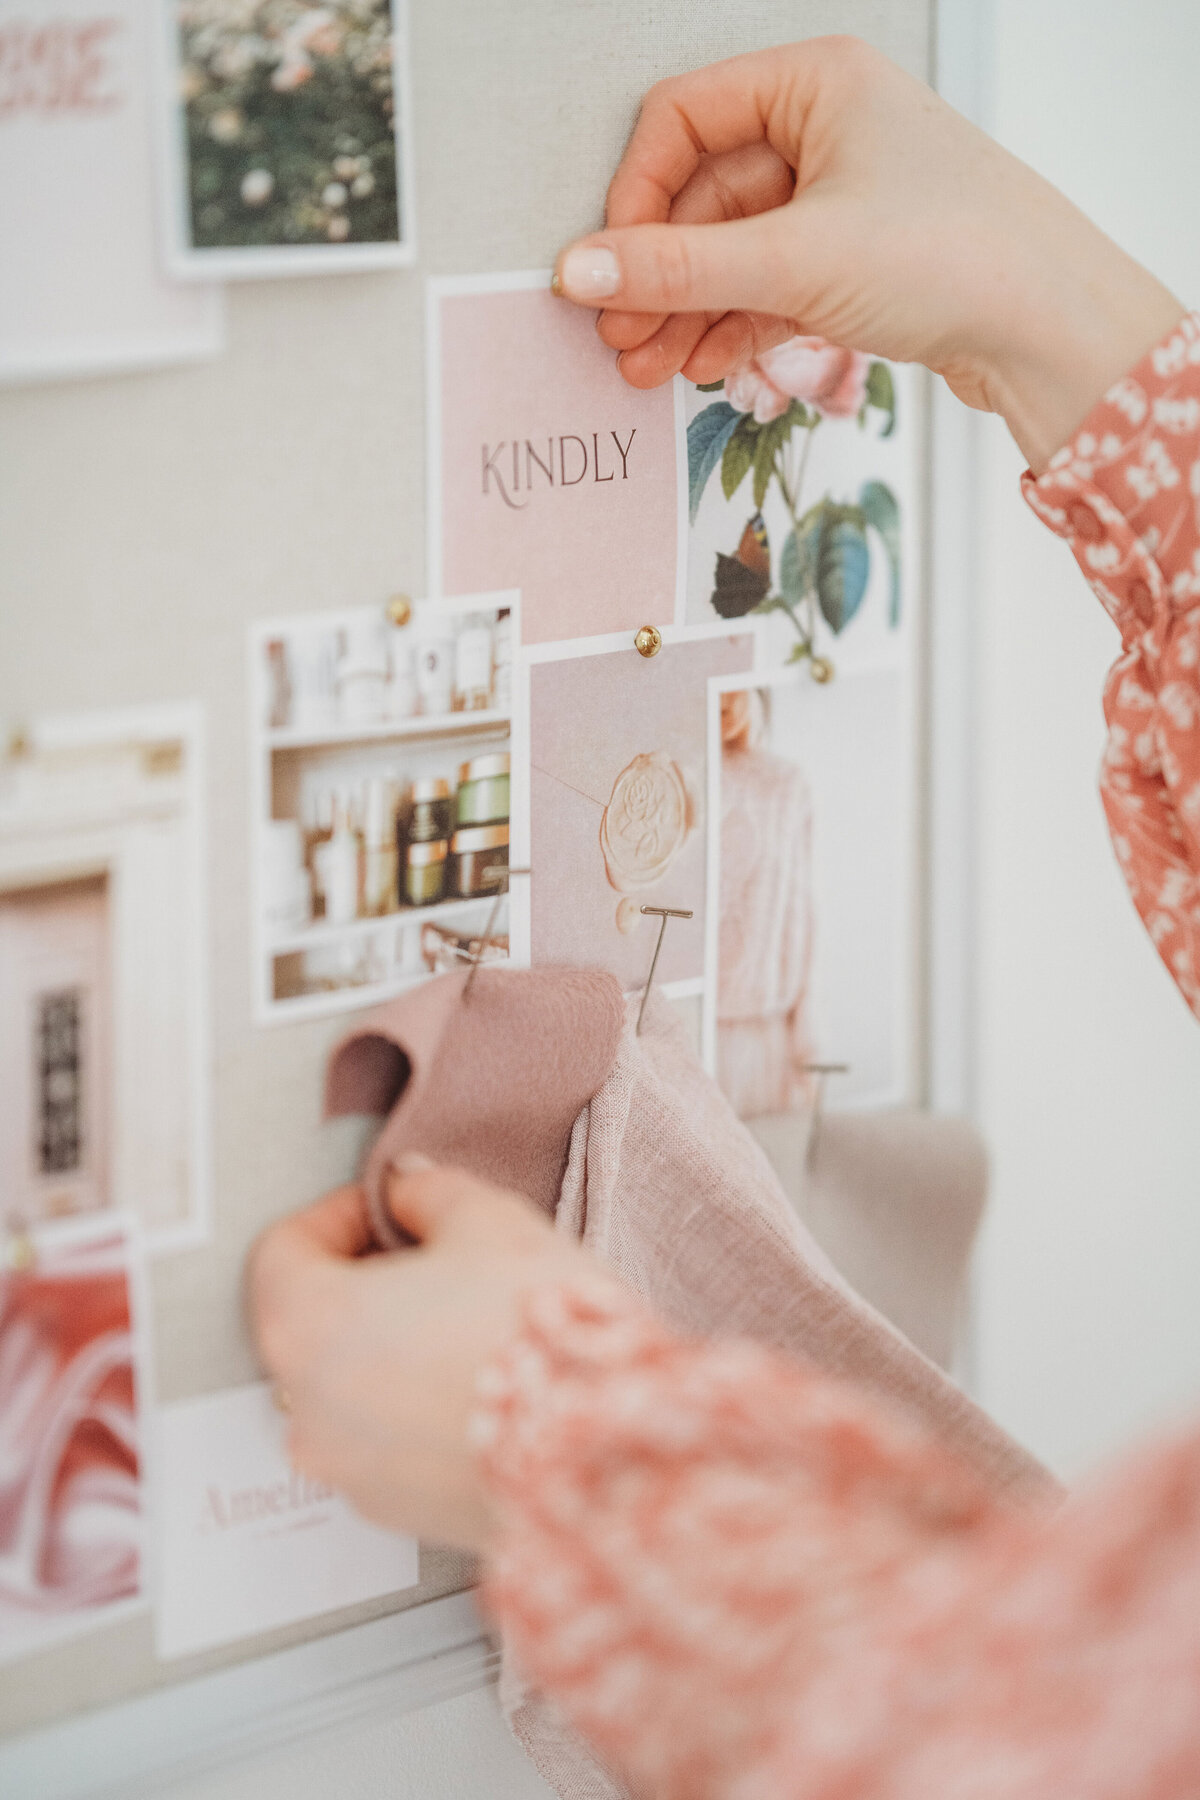 Feminine moodboard design with blush-toned colors, fabrics and design imagery